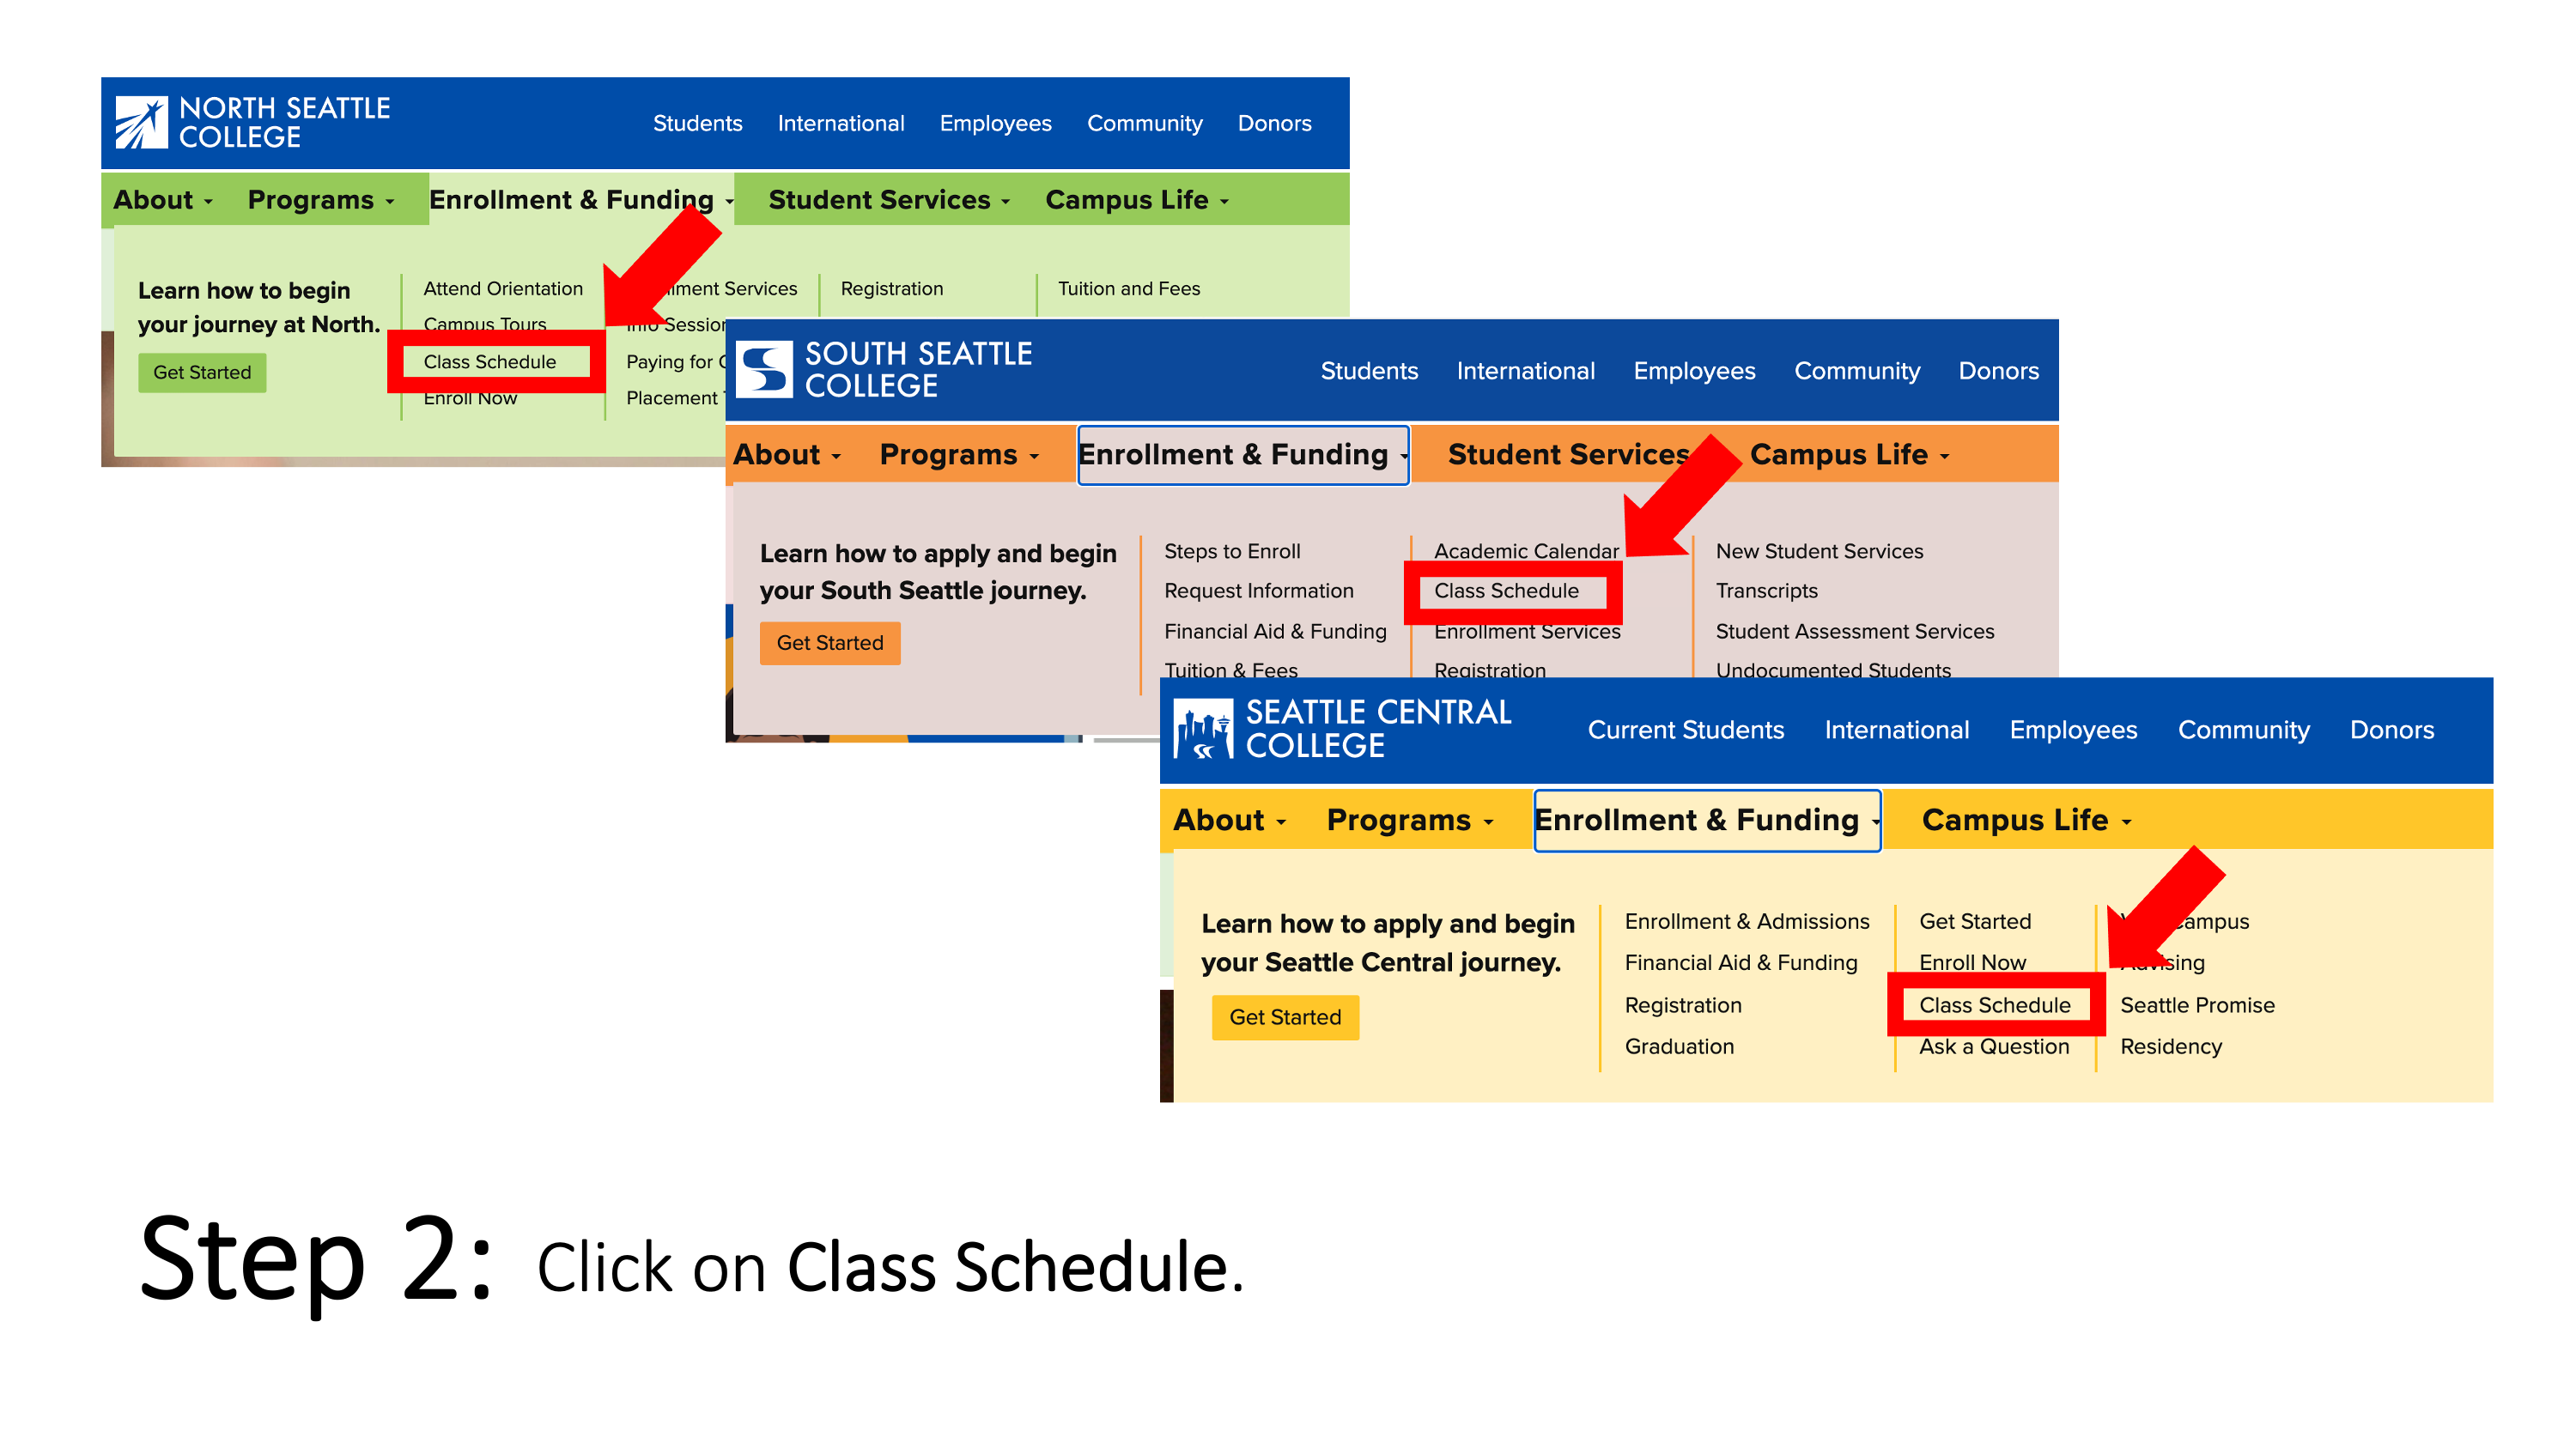 Click on Class Schedule.